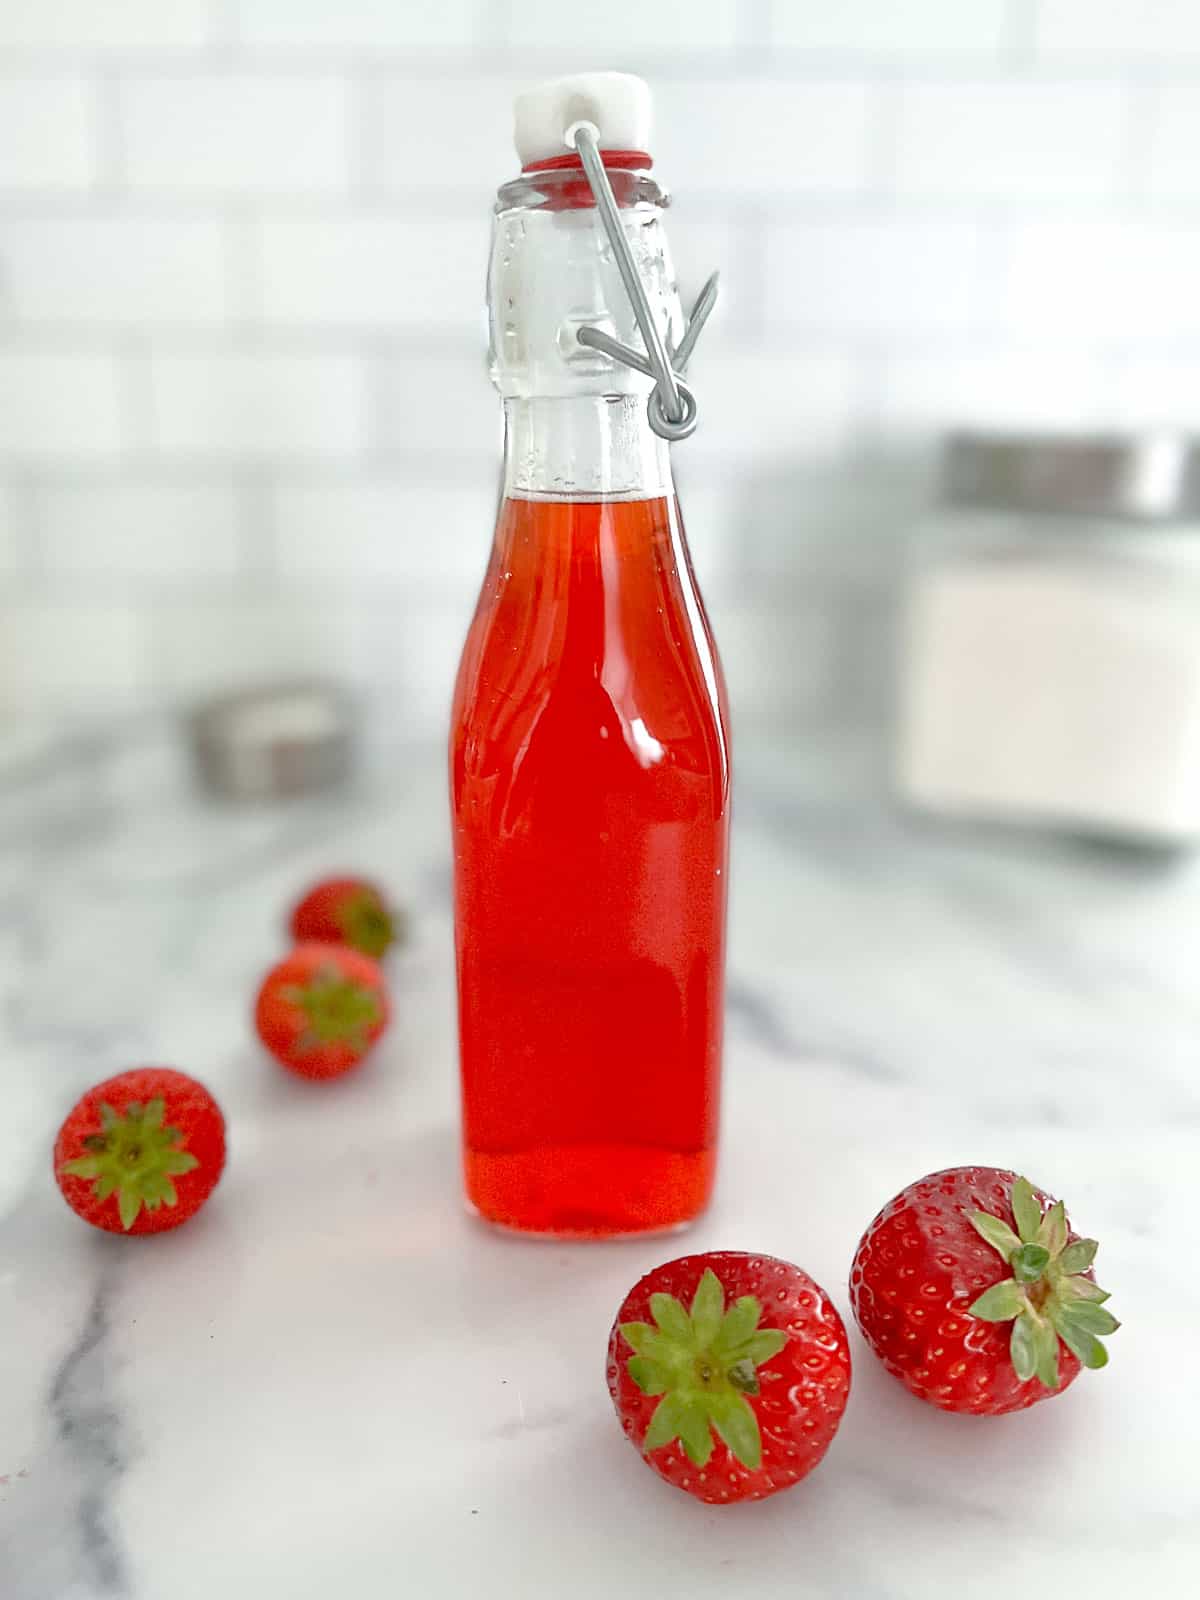 Homemade strawberry simple syrup in a glass bottle with strawberries on ground.
